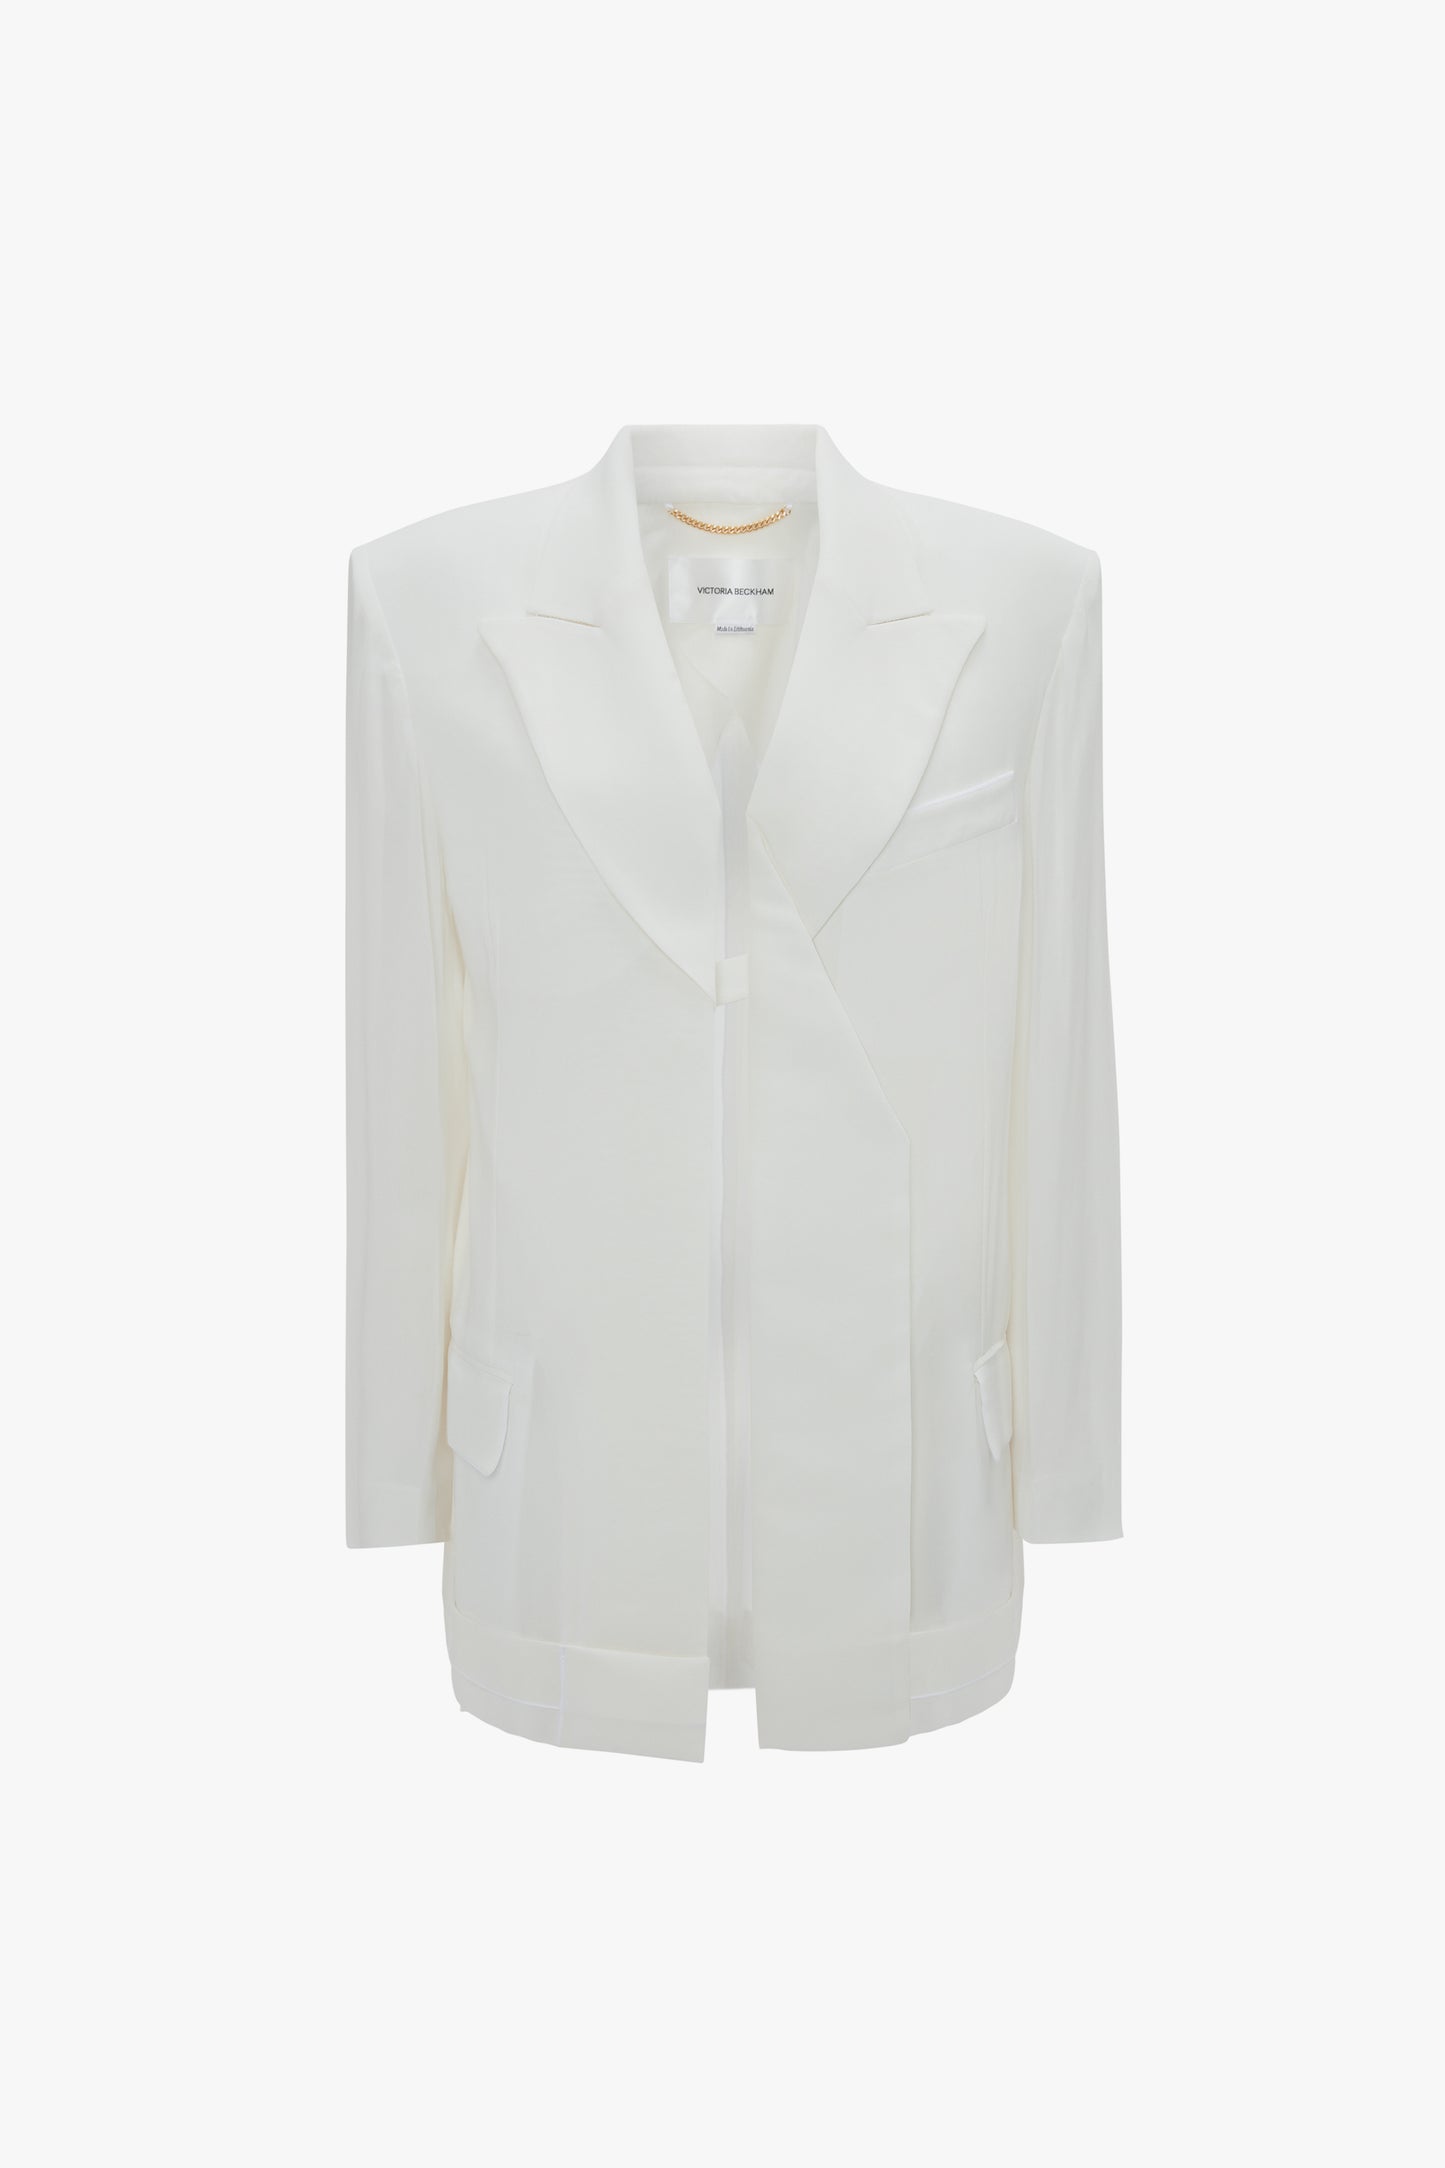 A Fold Detail Tailored Jacket In White by Victoria Beckham with fold detail and notched lapels, two front flap pockets, and a chest pocket on a white background. Crafted from featherweight wool for a modern flair.